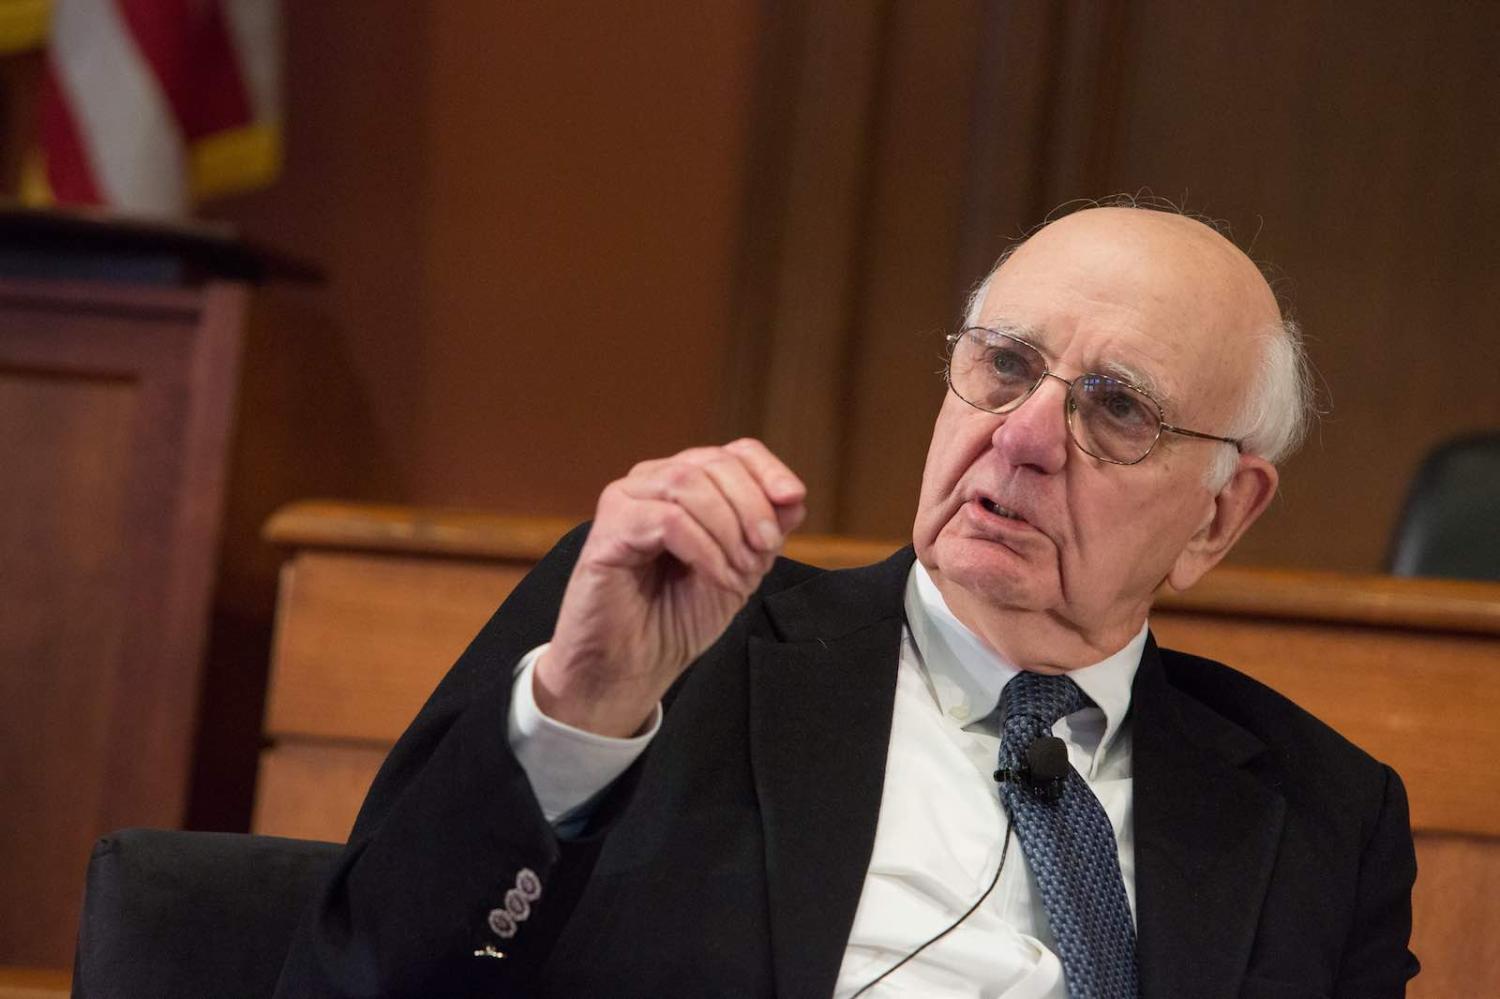 Paul Volcker, chairman of the Board of Governors of the US Federal Reserve from 1979 to 1987, presenting at Harvard University in 2012 (Photo: Edmond J. Safra Center for Ethics/Flickr)